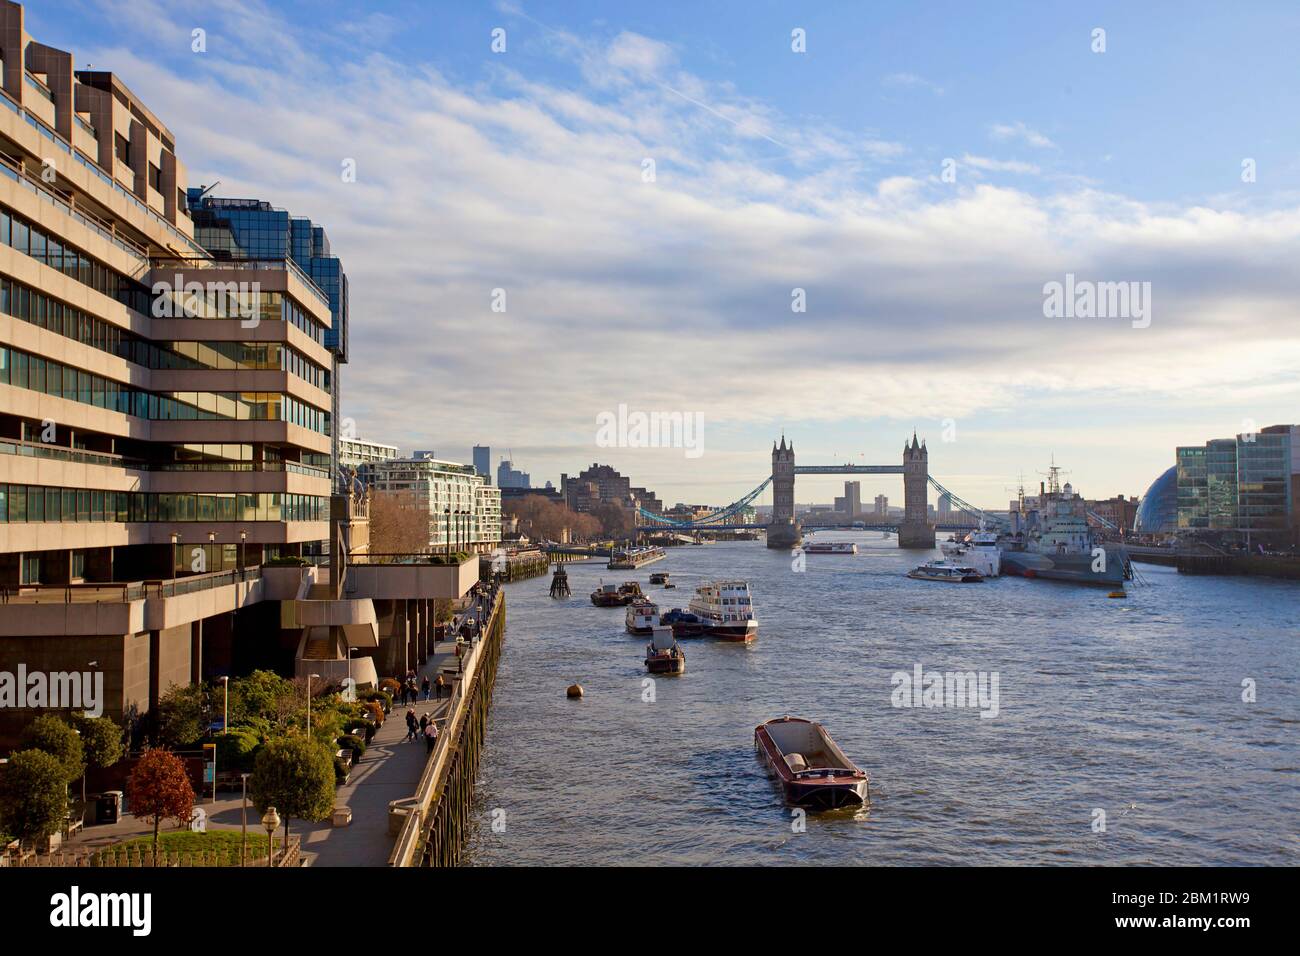 Looking up the River Thames towards Tower Bridge, London Stock Photo